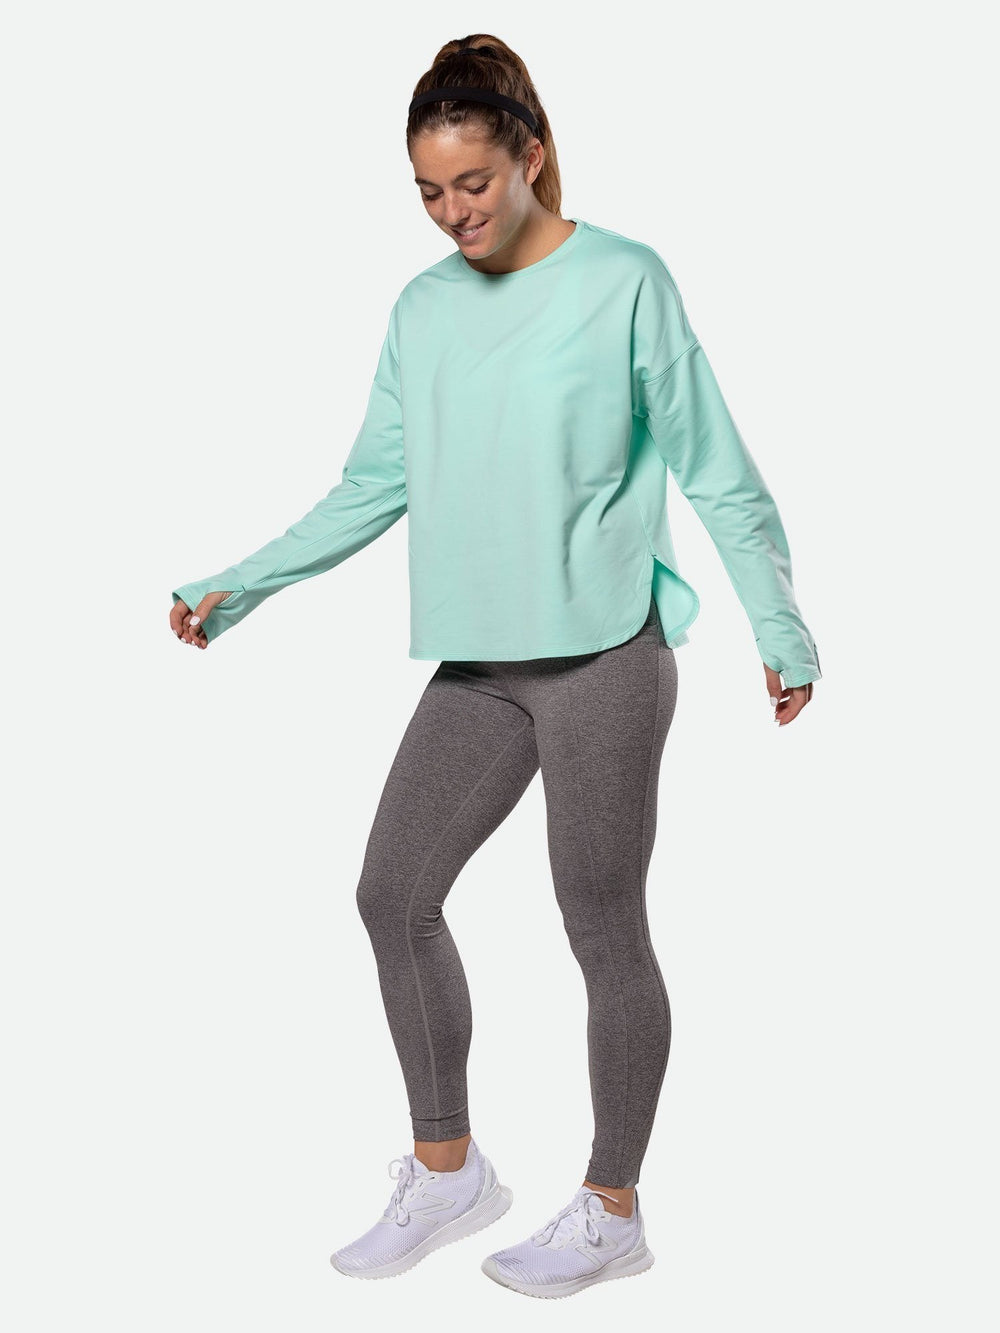 NWT Lululemon Back In Action Long Sleeve Shirt Delicate Mint Size ：8